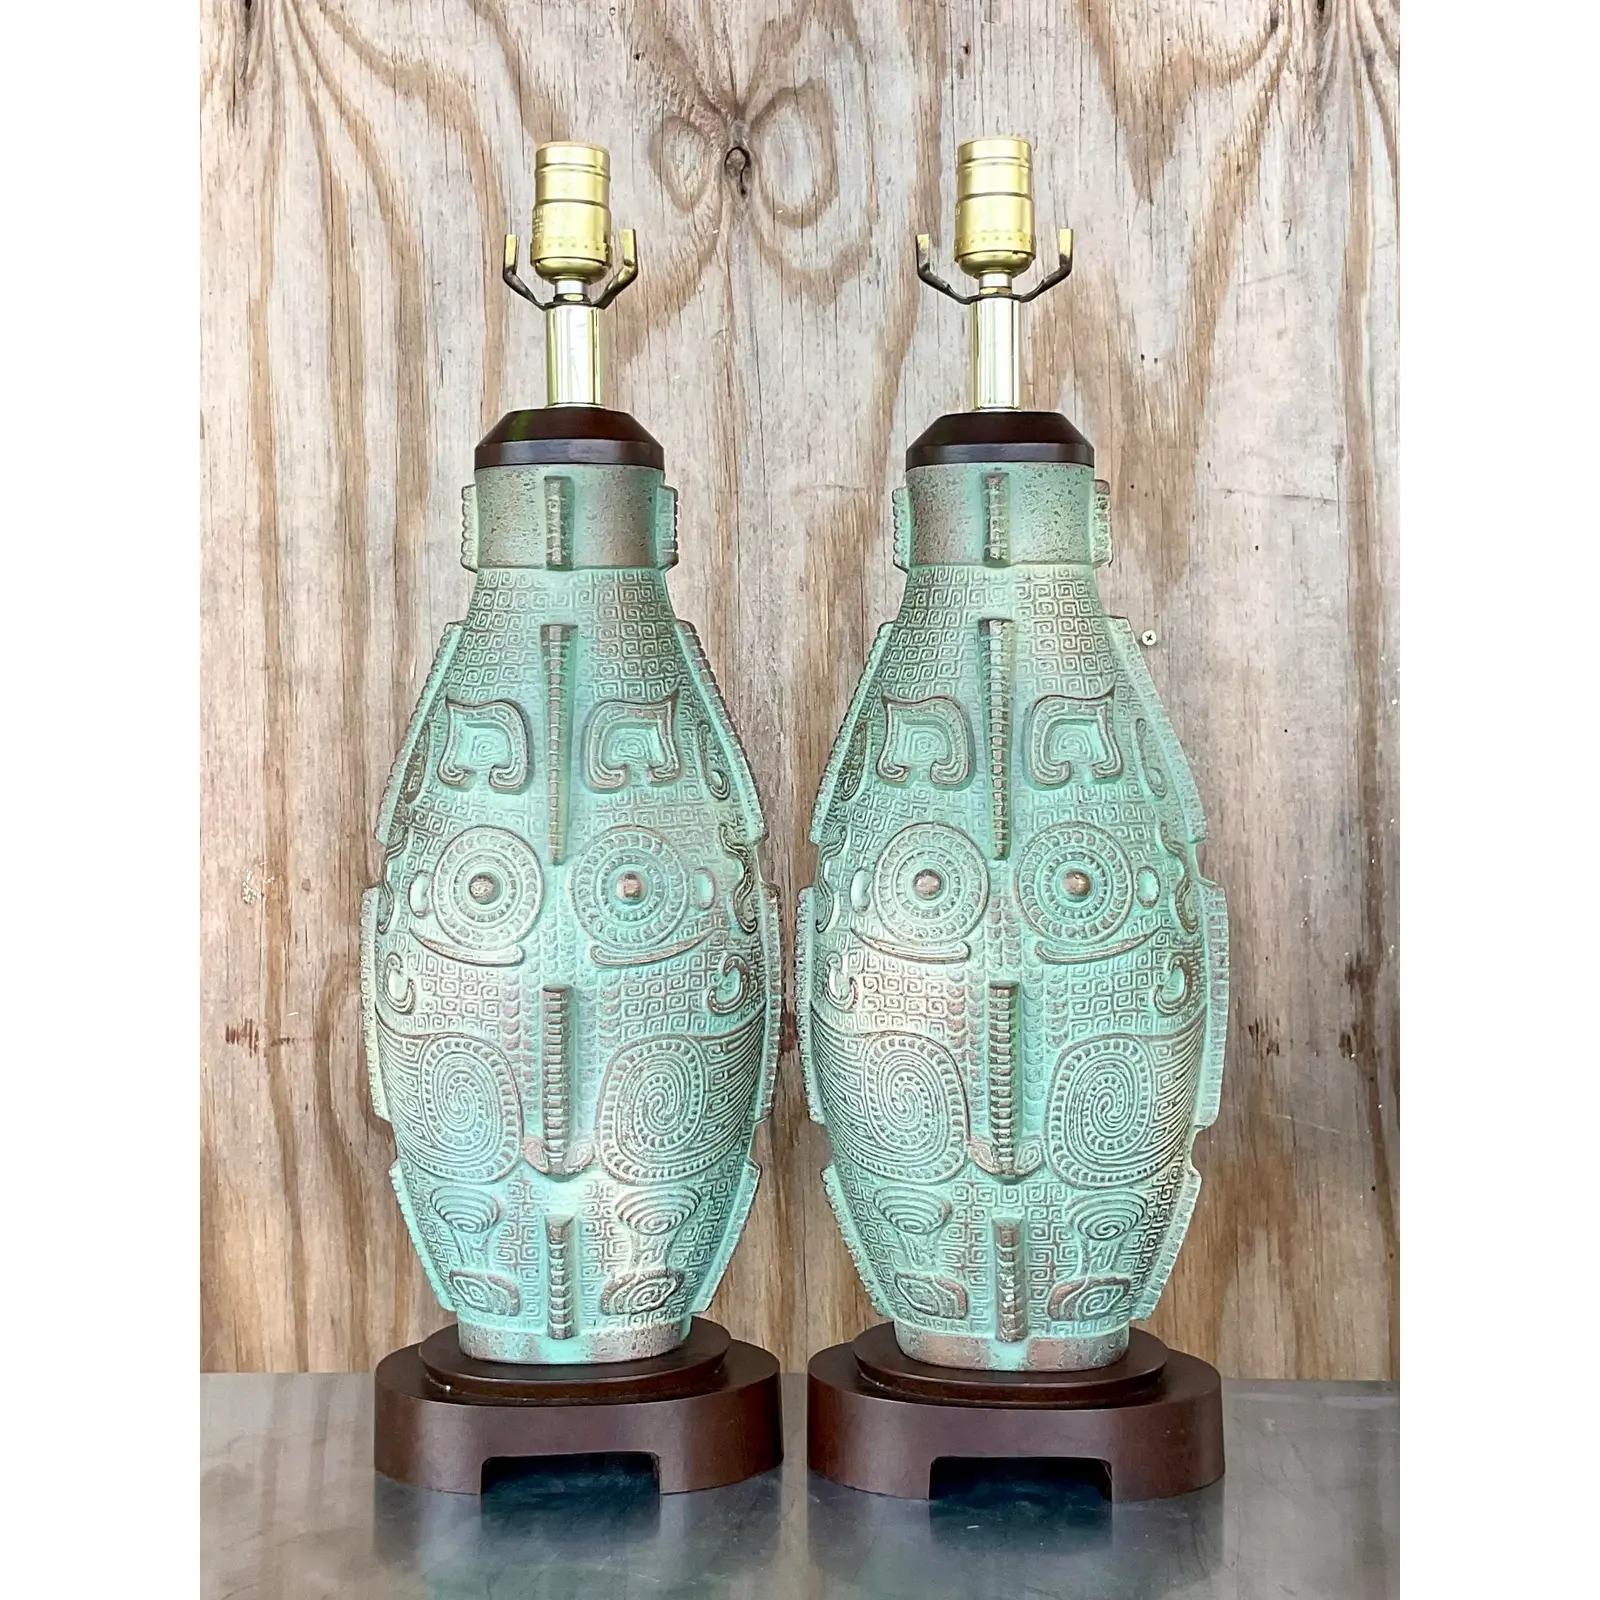 Fantastic pair of vintage Boho lamps. Beautiful matte ceramic finish with light gilt detailing. Chic Aztec inspired design. Acquired from a Palm Beach estate.